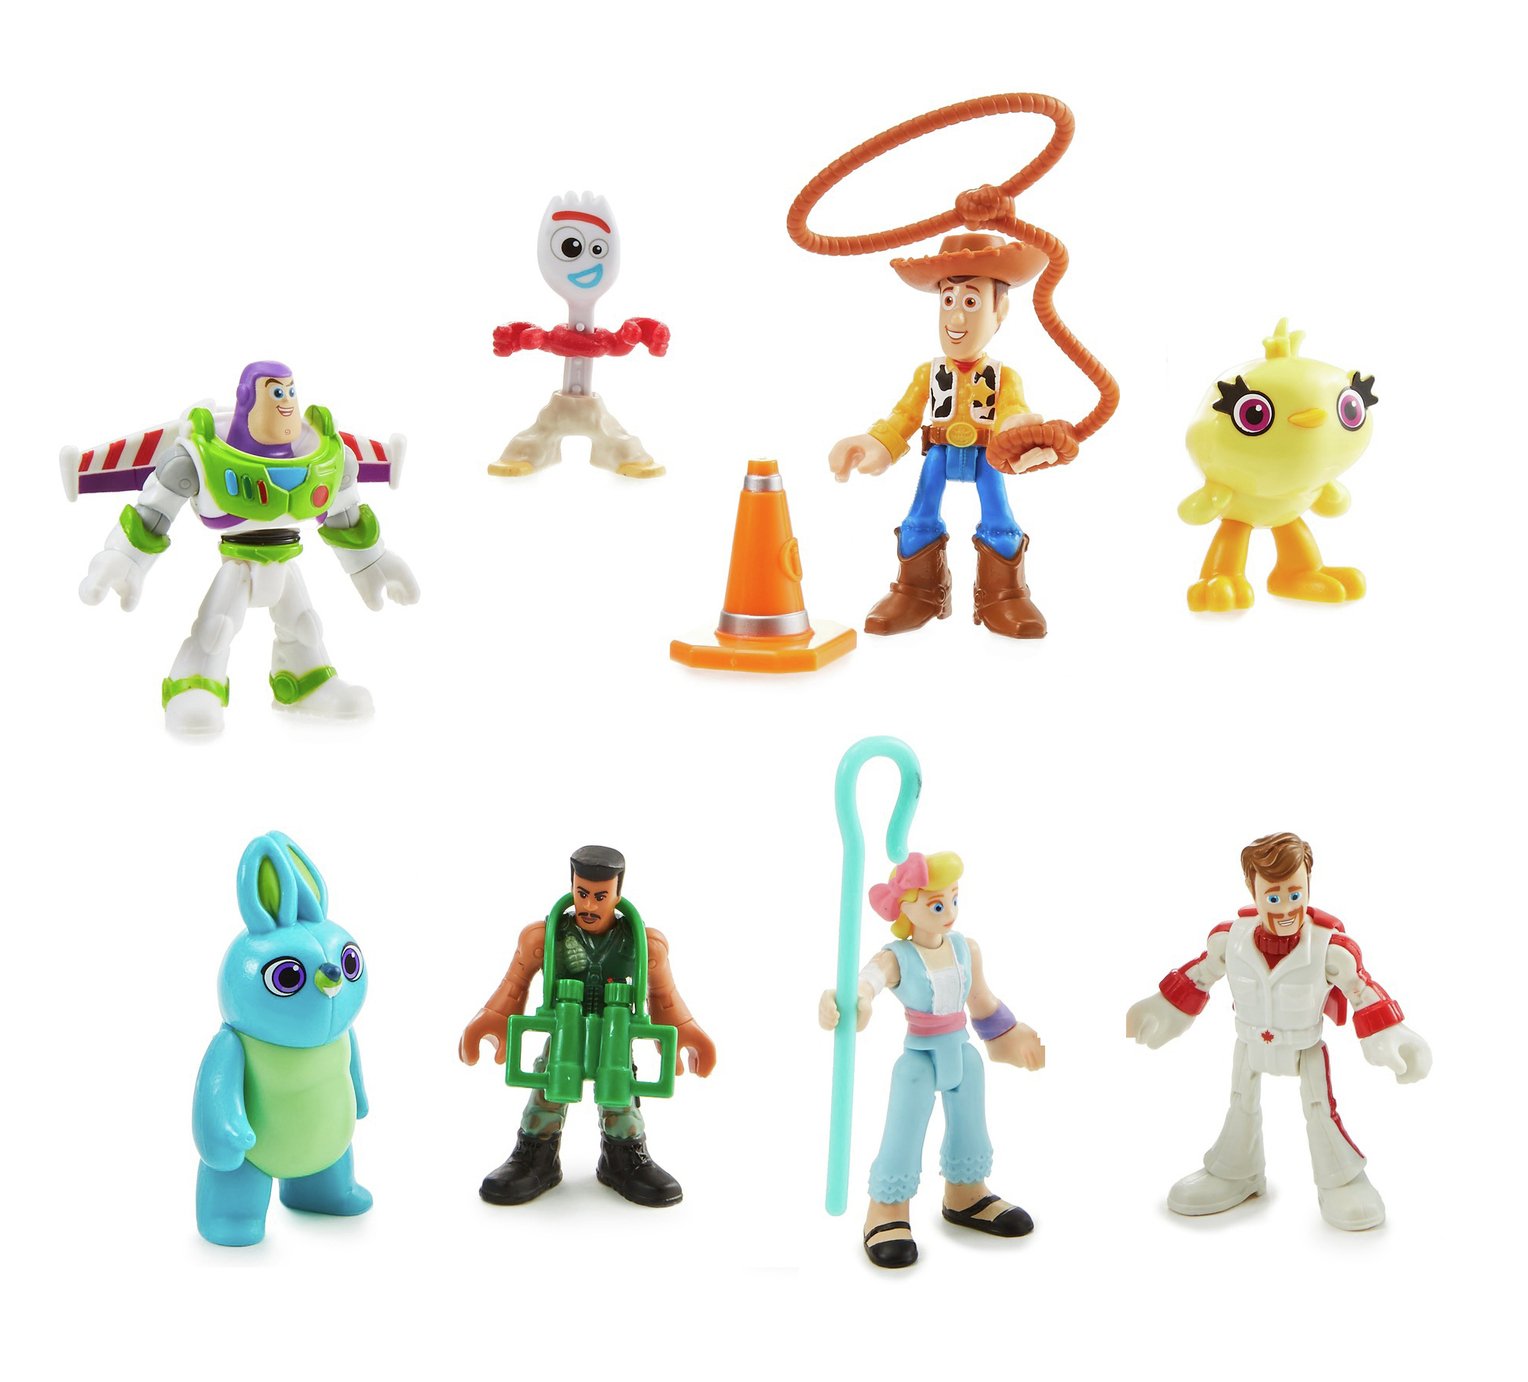 Toy Story 4 Imaginext Deluxe 8 Pack Figure Set Review